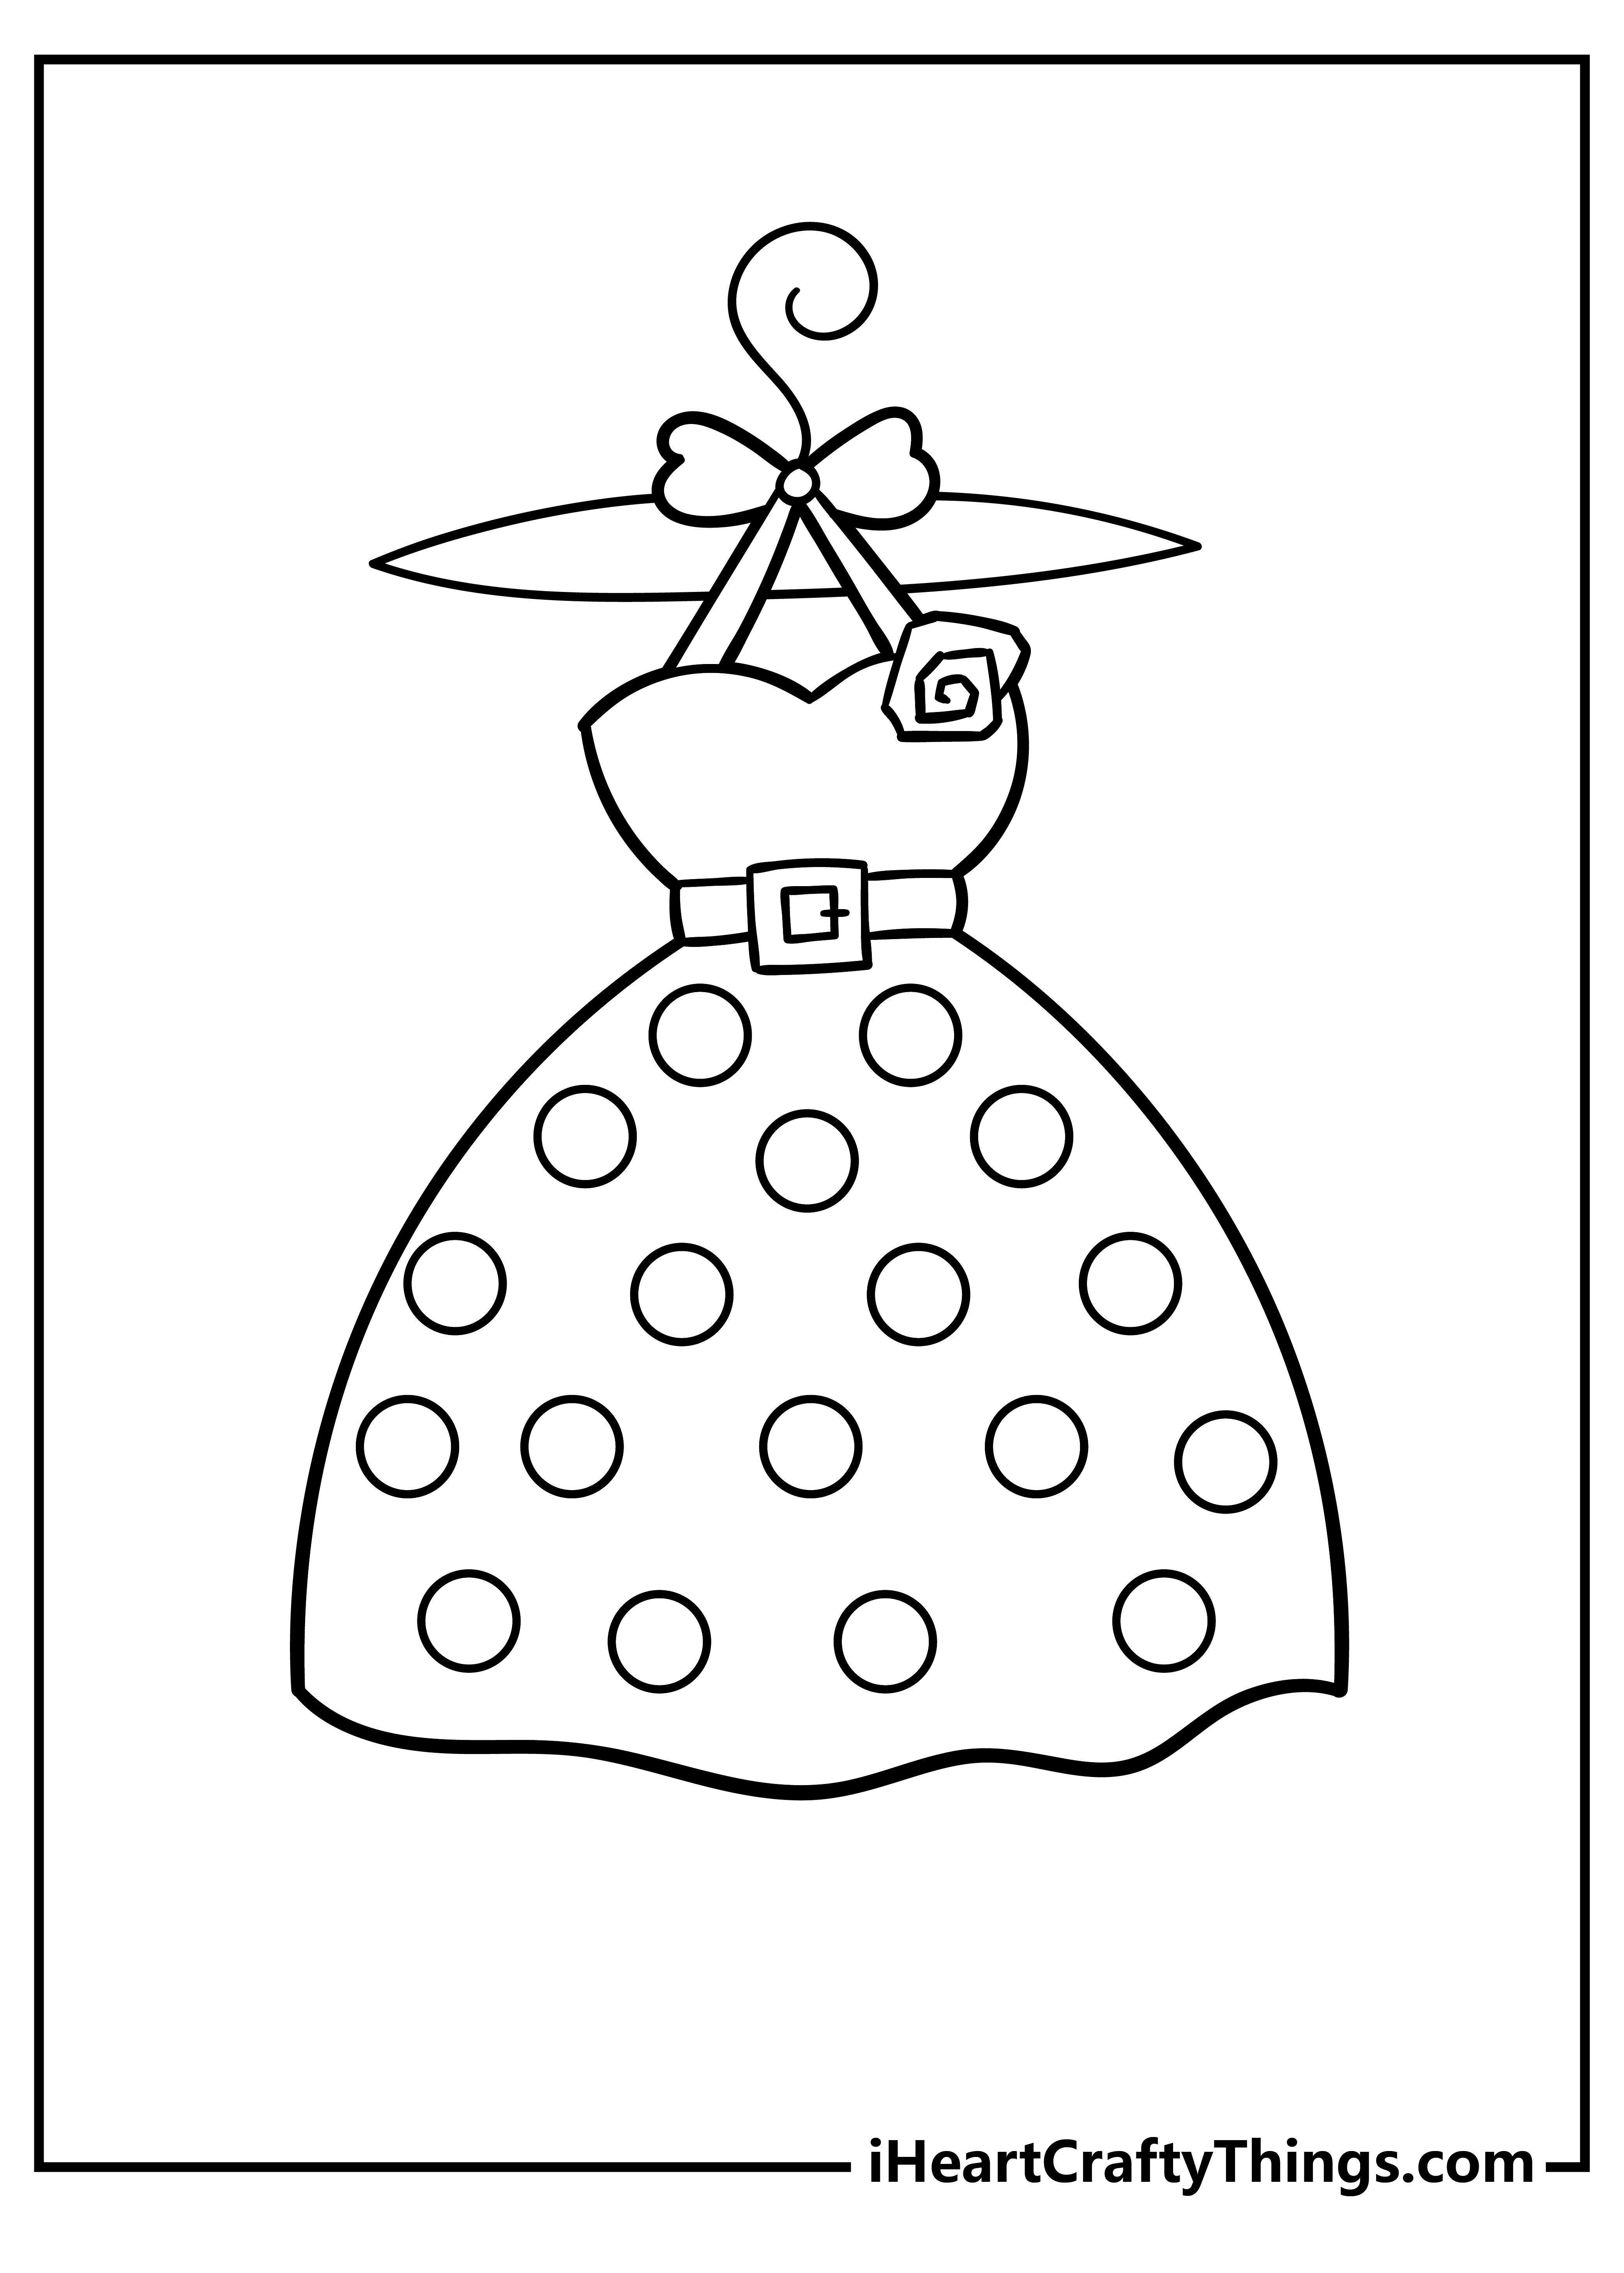 Coloring Pages For Girls free download